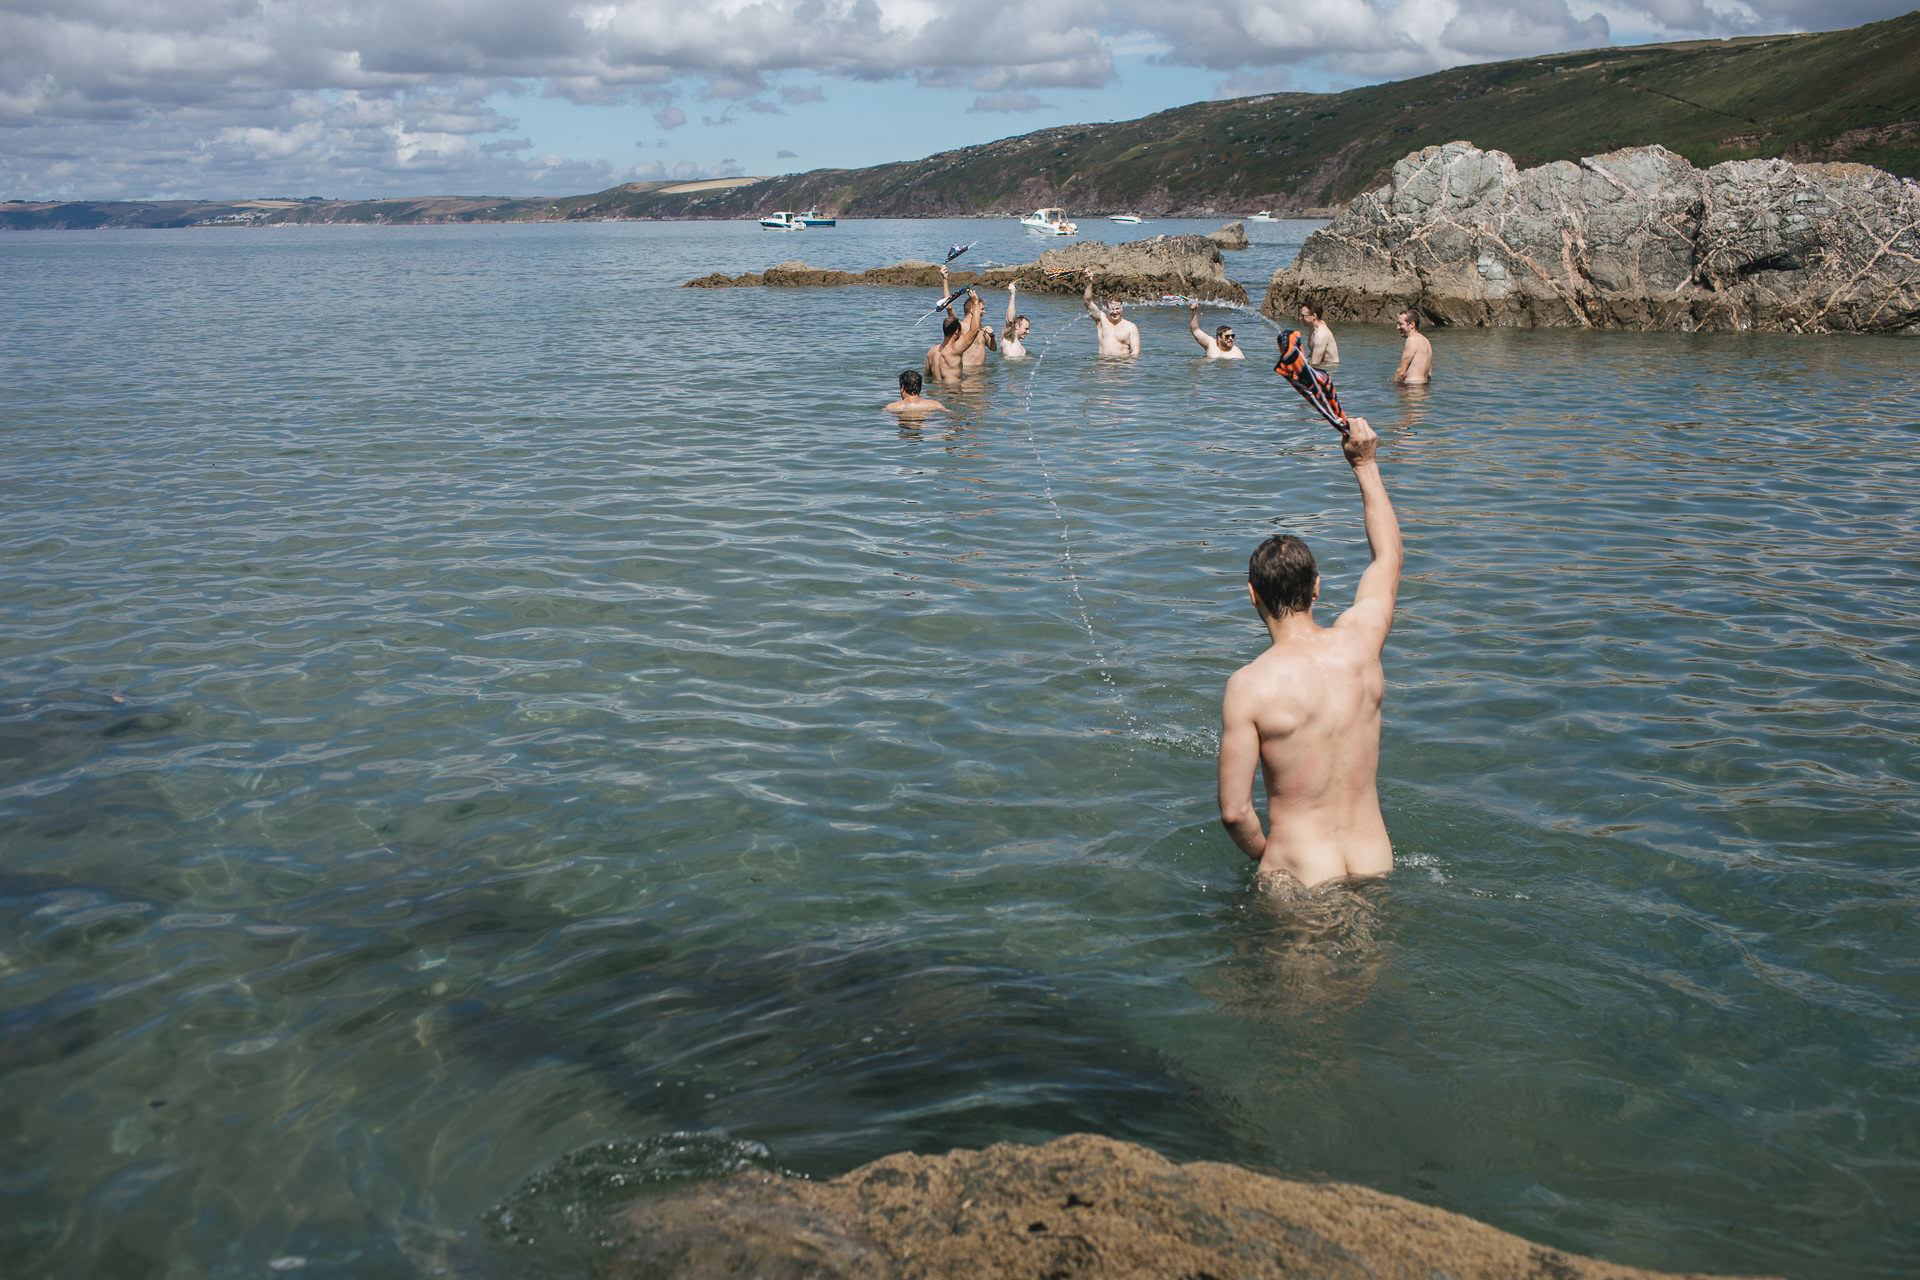 Men in the sea waving trunks in the air